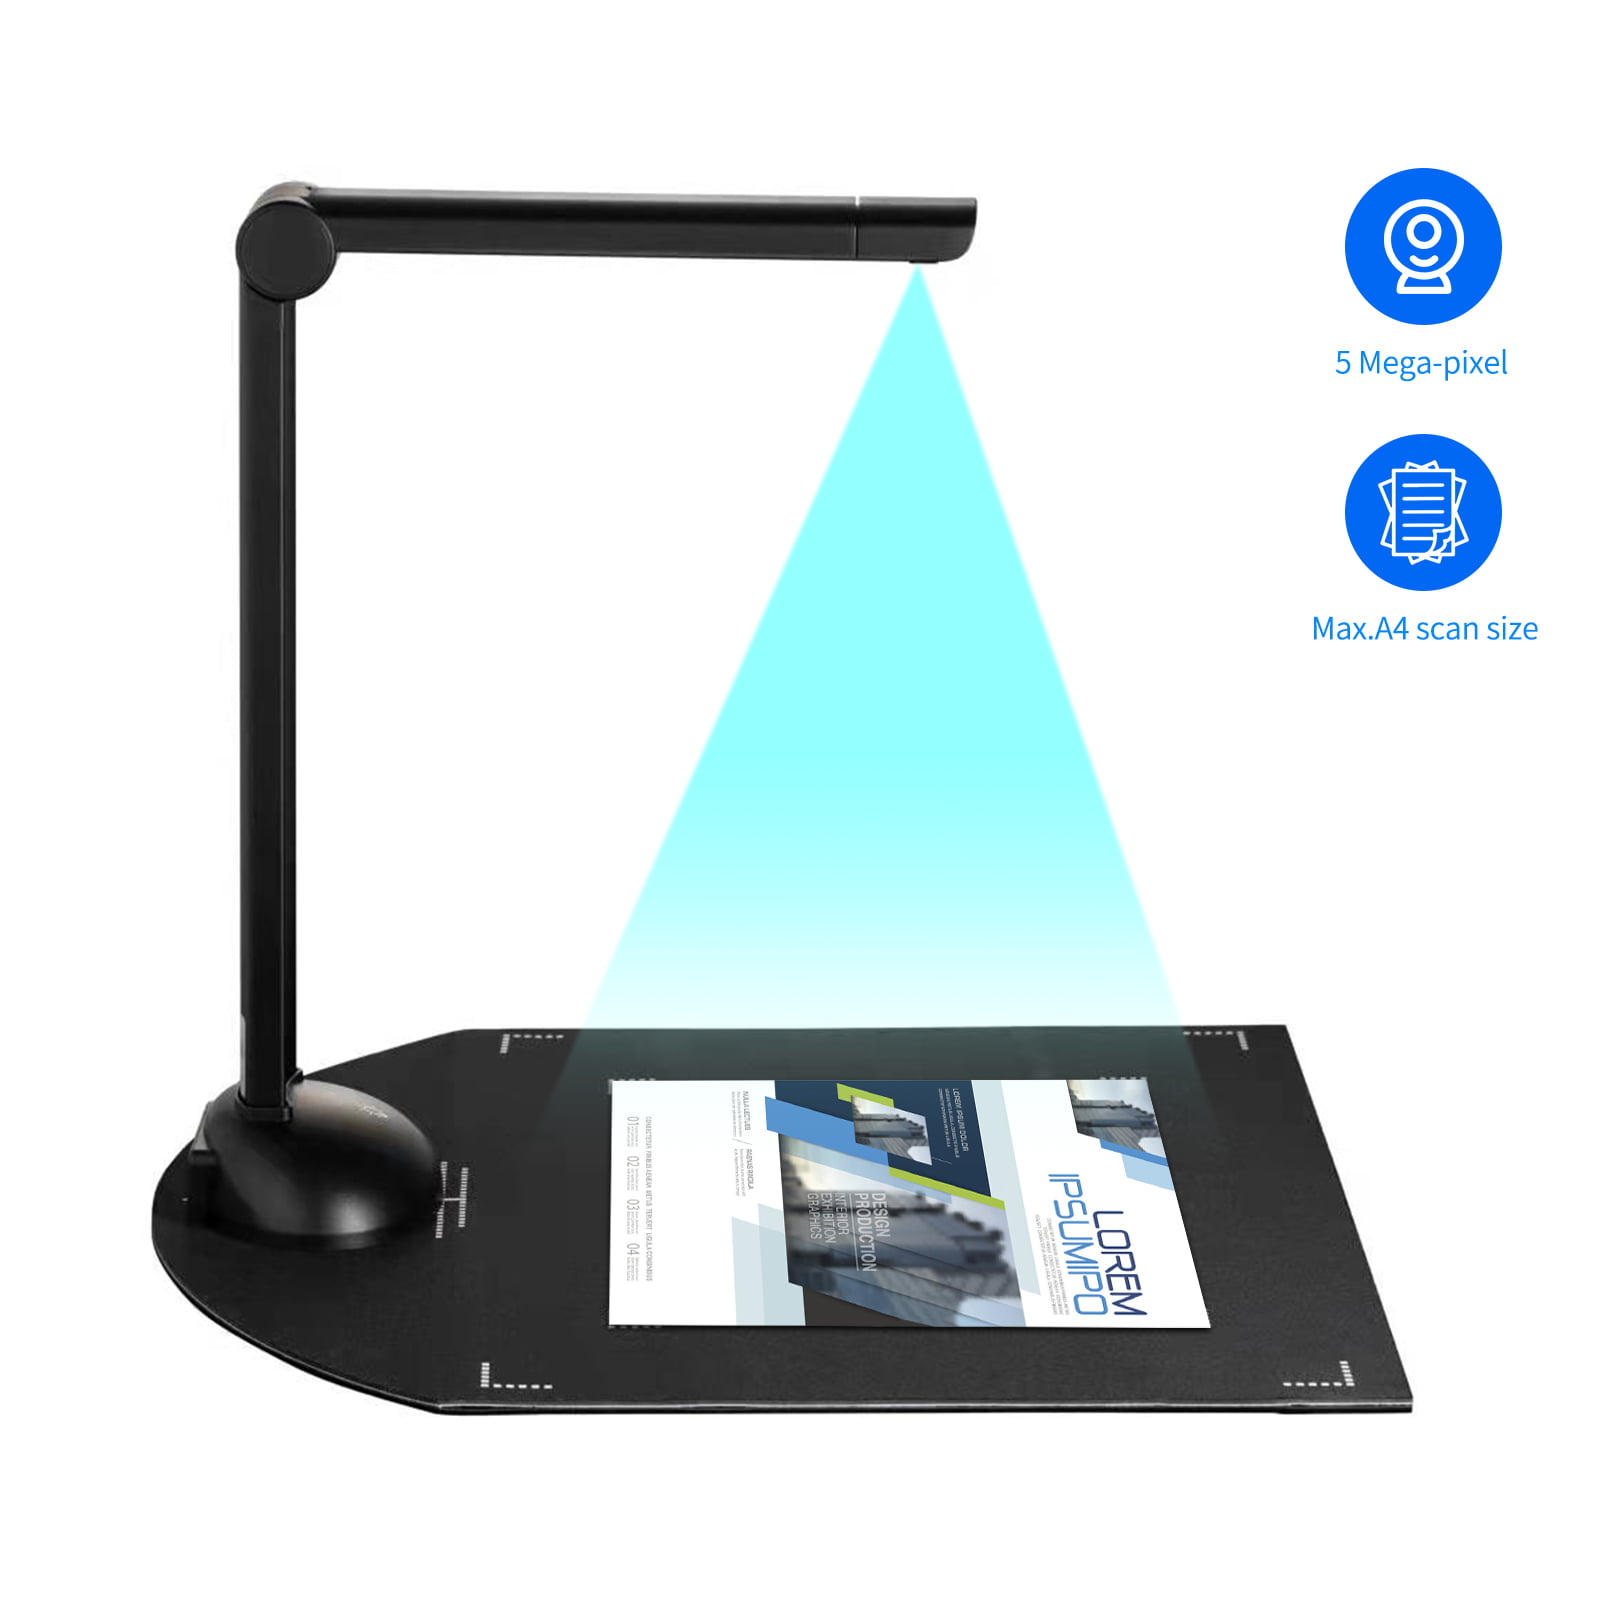 Aibecy Portable High Speed USB Book Image Document Camera Scanner 5 Mega-pixel HD High-Definition Max A4 Scanning Size with OCR Function LED Light for Classroom Office Library Bank 